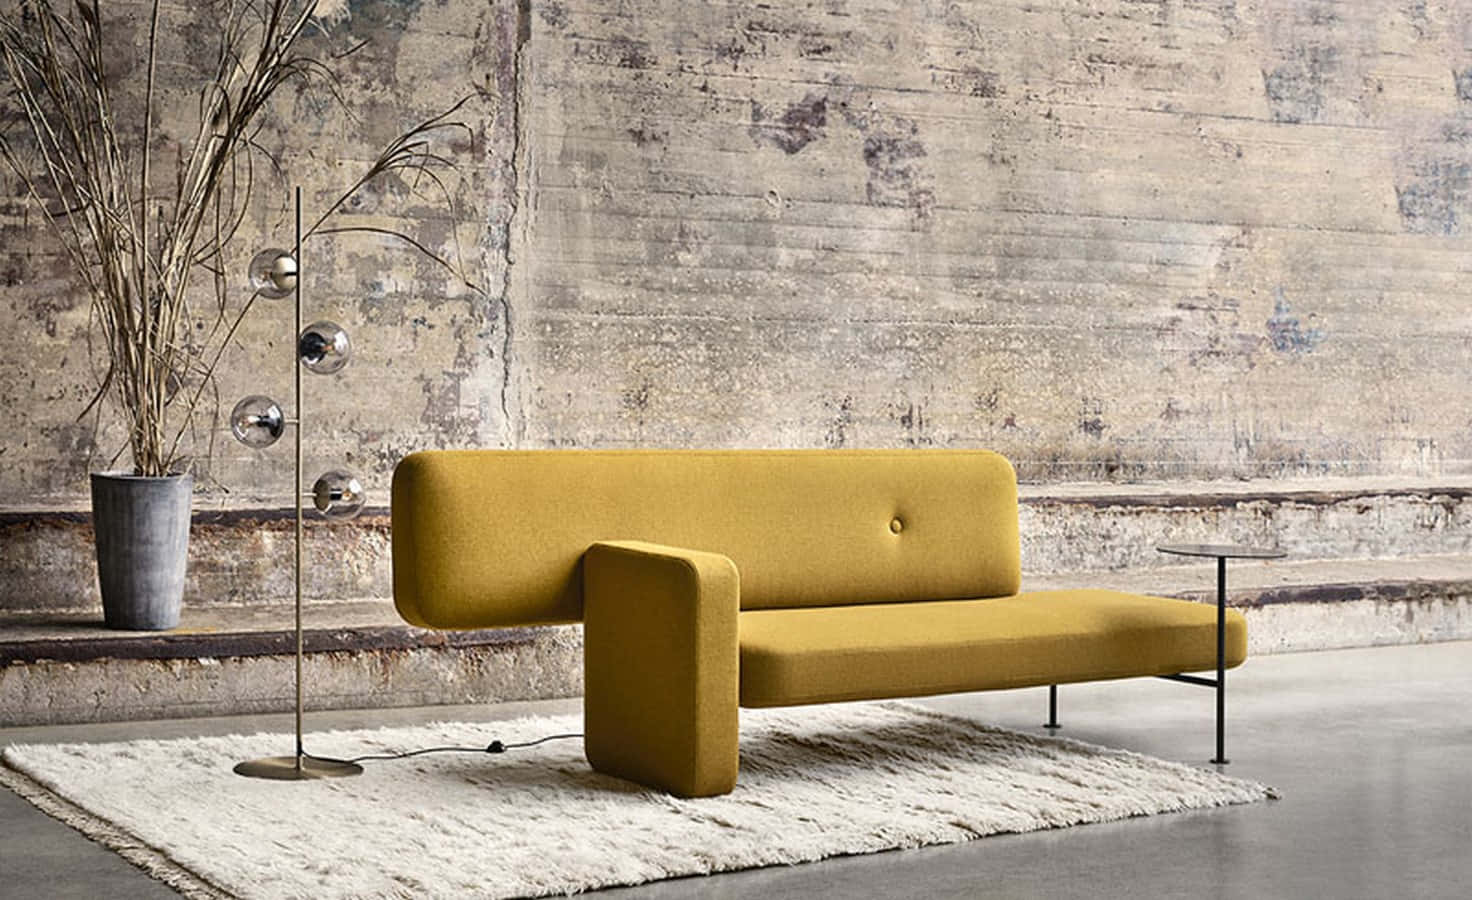 Unique Long Yellow Couch Wallpaper